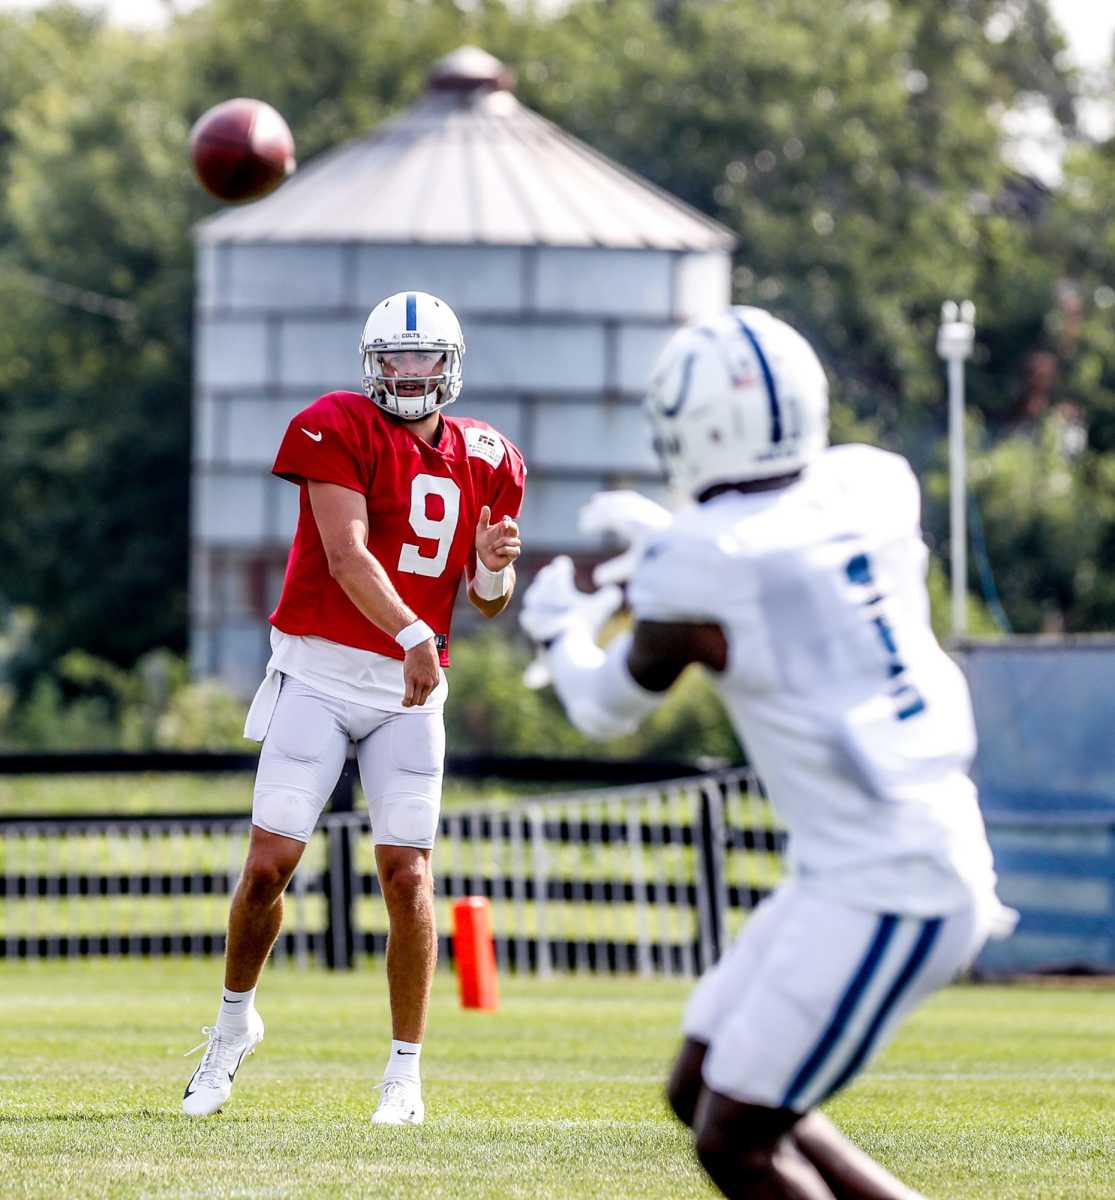 The Indianapolis Colts quarterback Jacob Eason (9) throws to wide receiver Parris Campbell (1) during Colts Camp practice on Sunday, August 8, 2021, at Grand Park in Westfield, Ind.